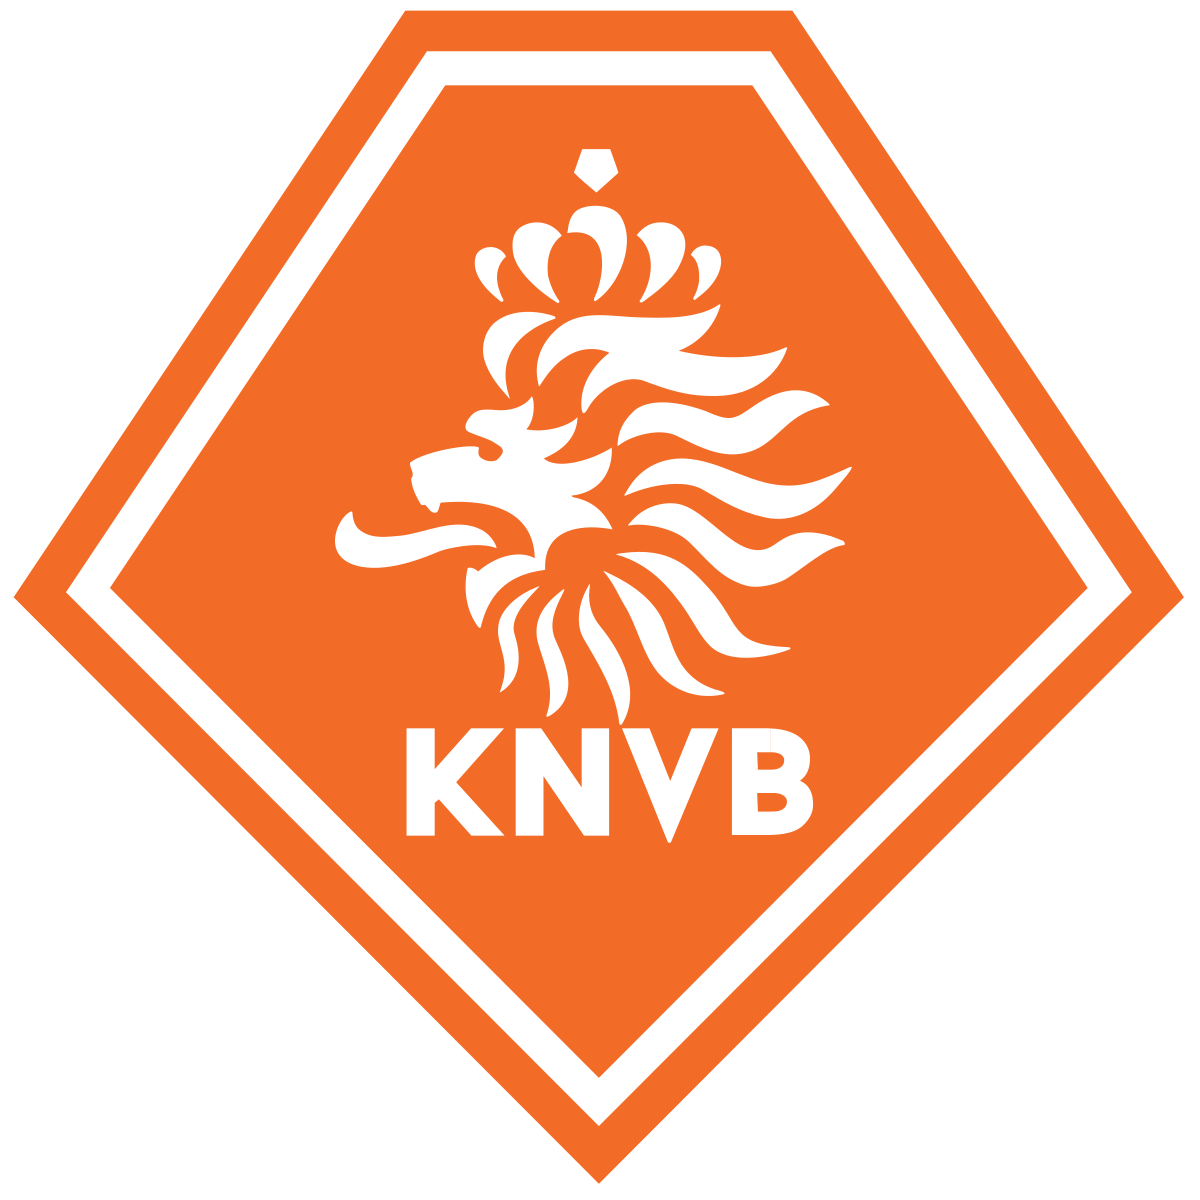 KNVB.png